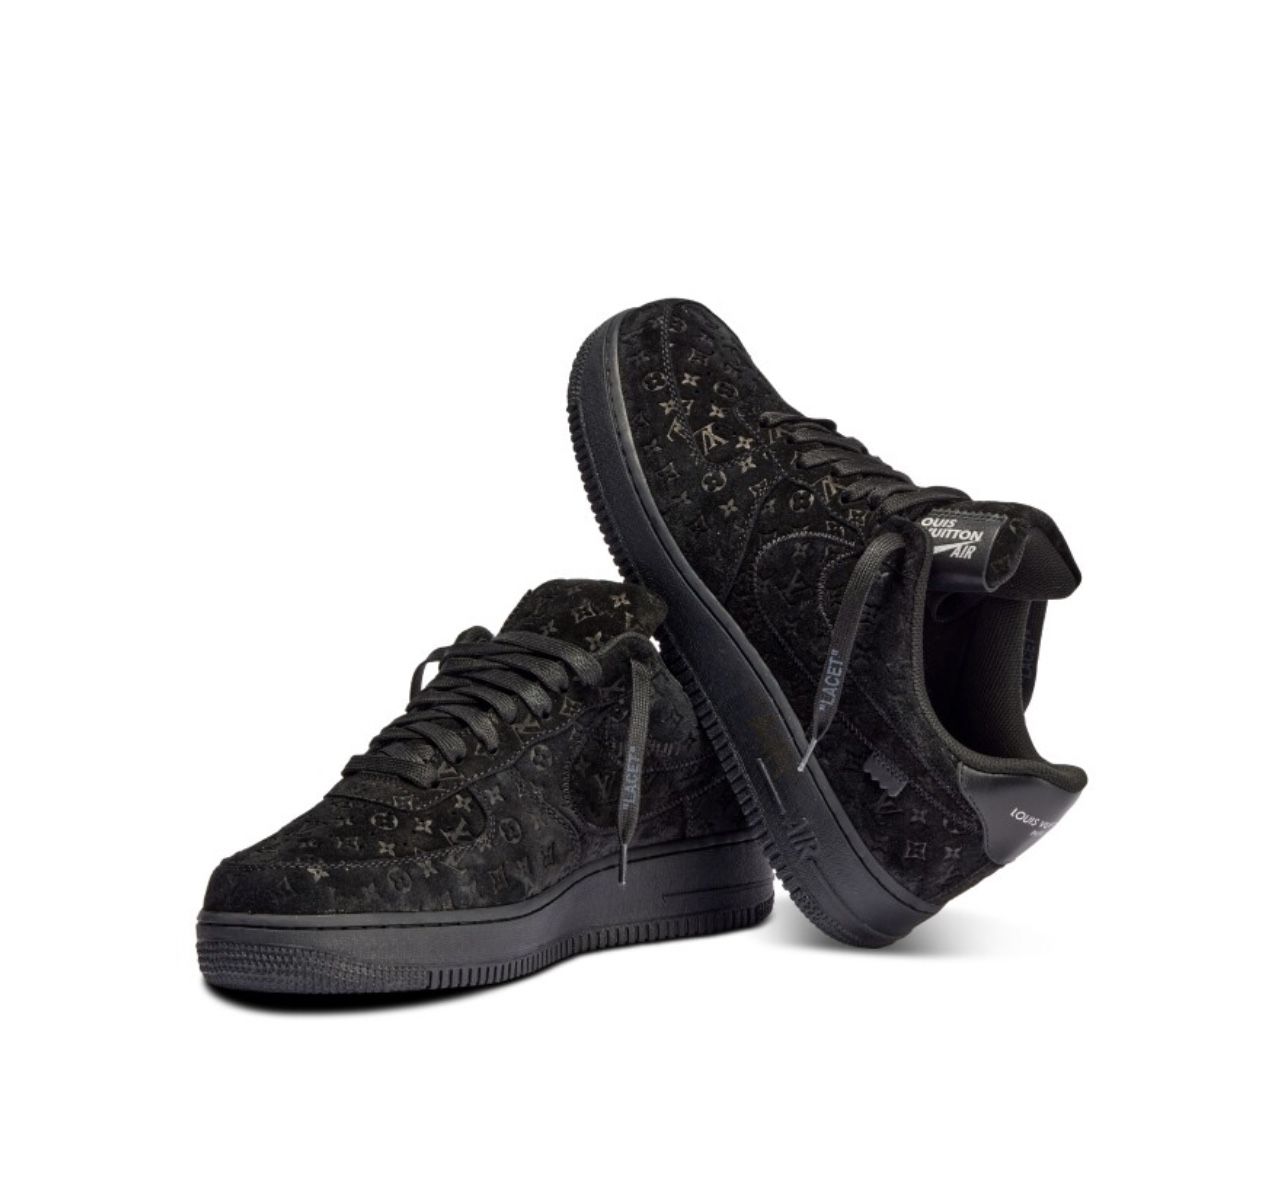 $5500. Brand New Louis Vuitton x Nike AF1 Black Suede. Size 8.5. For sale  or trade in store Tuesday at 12pm. #D1NY